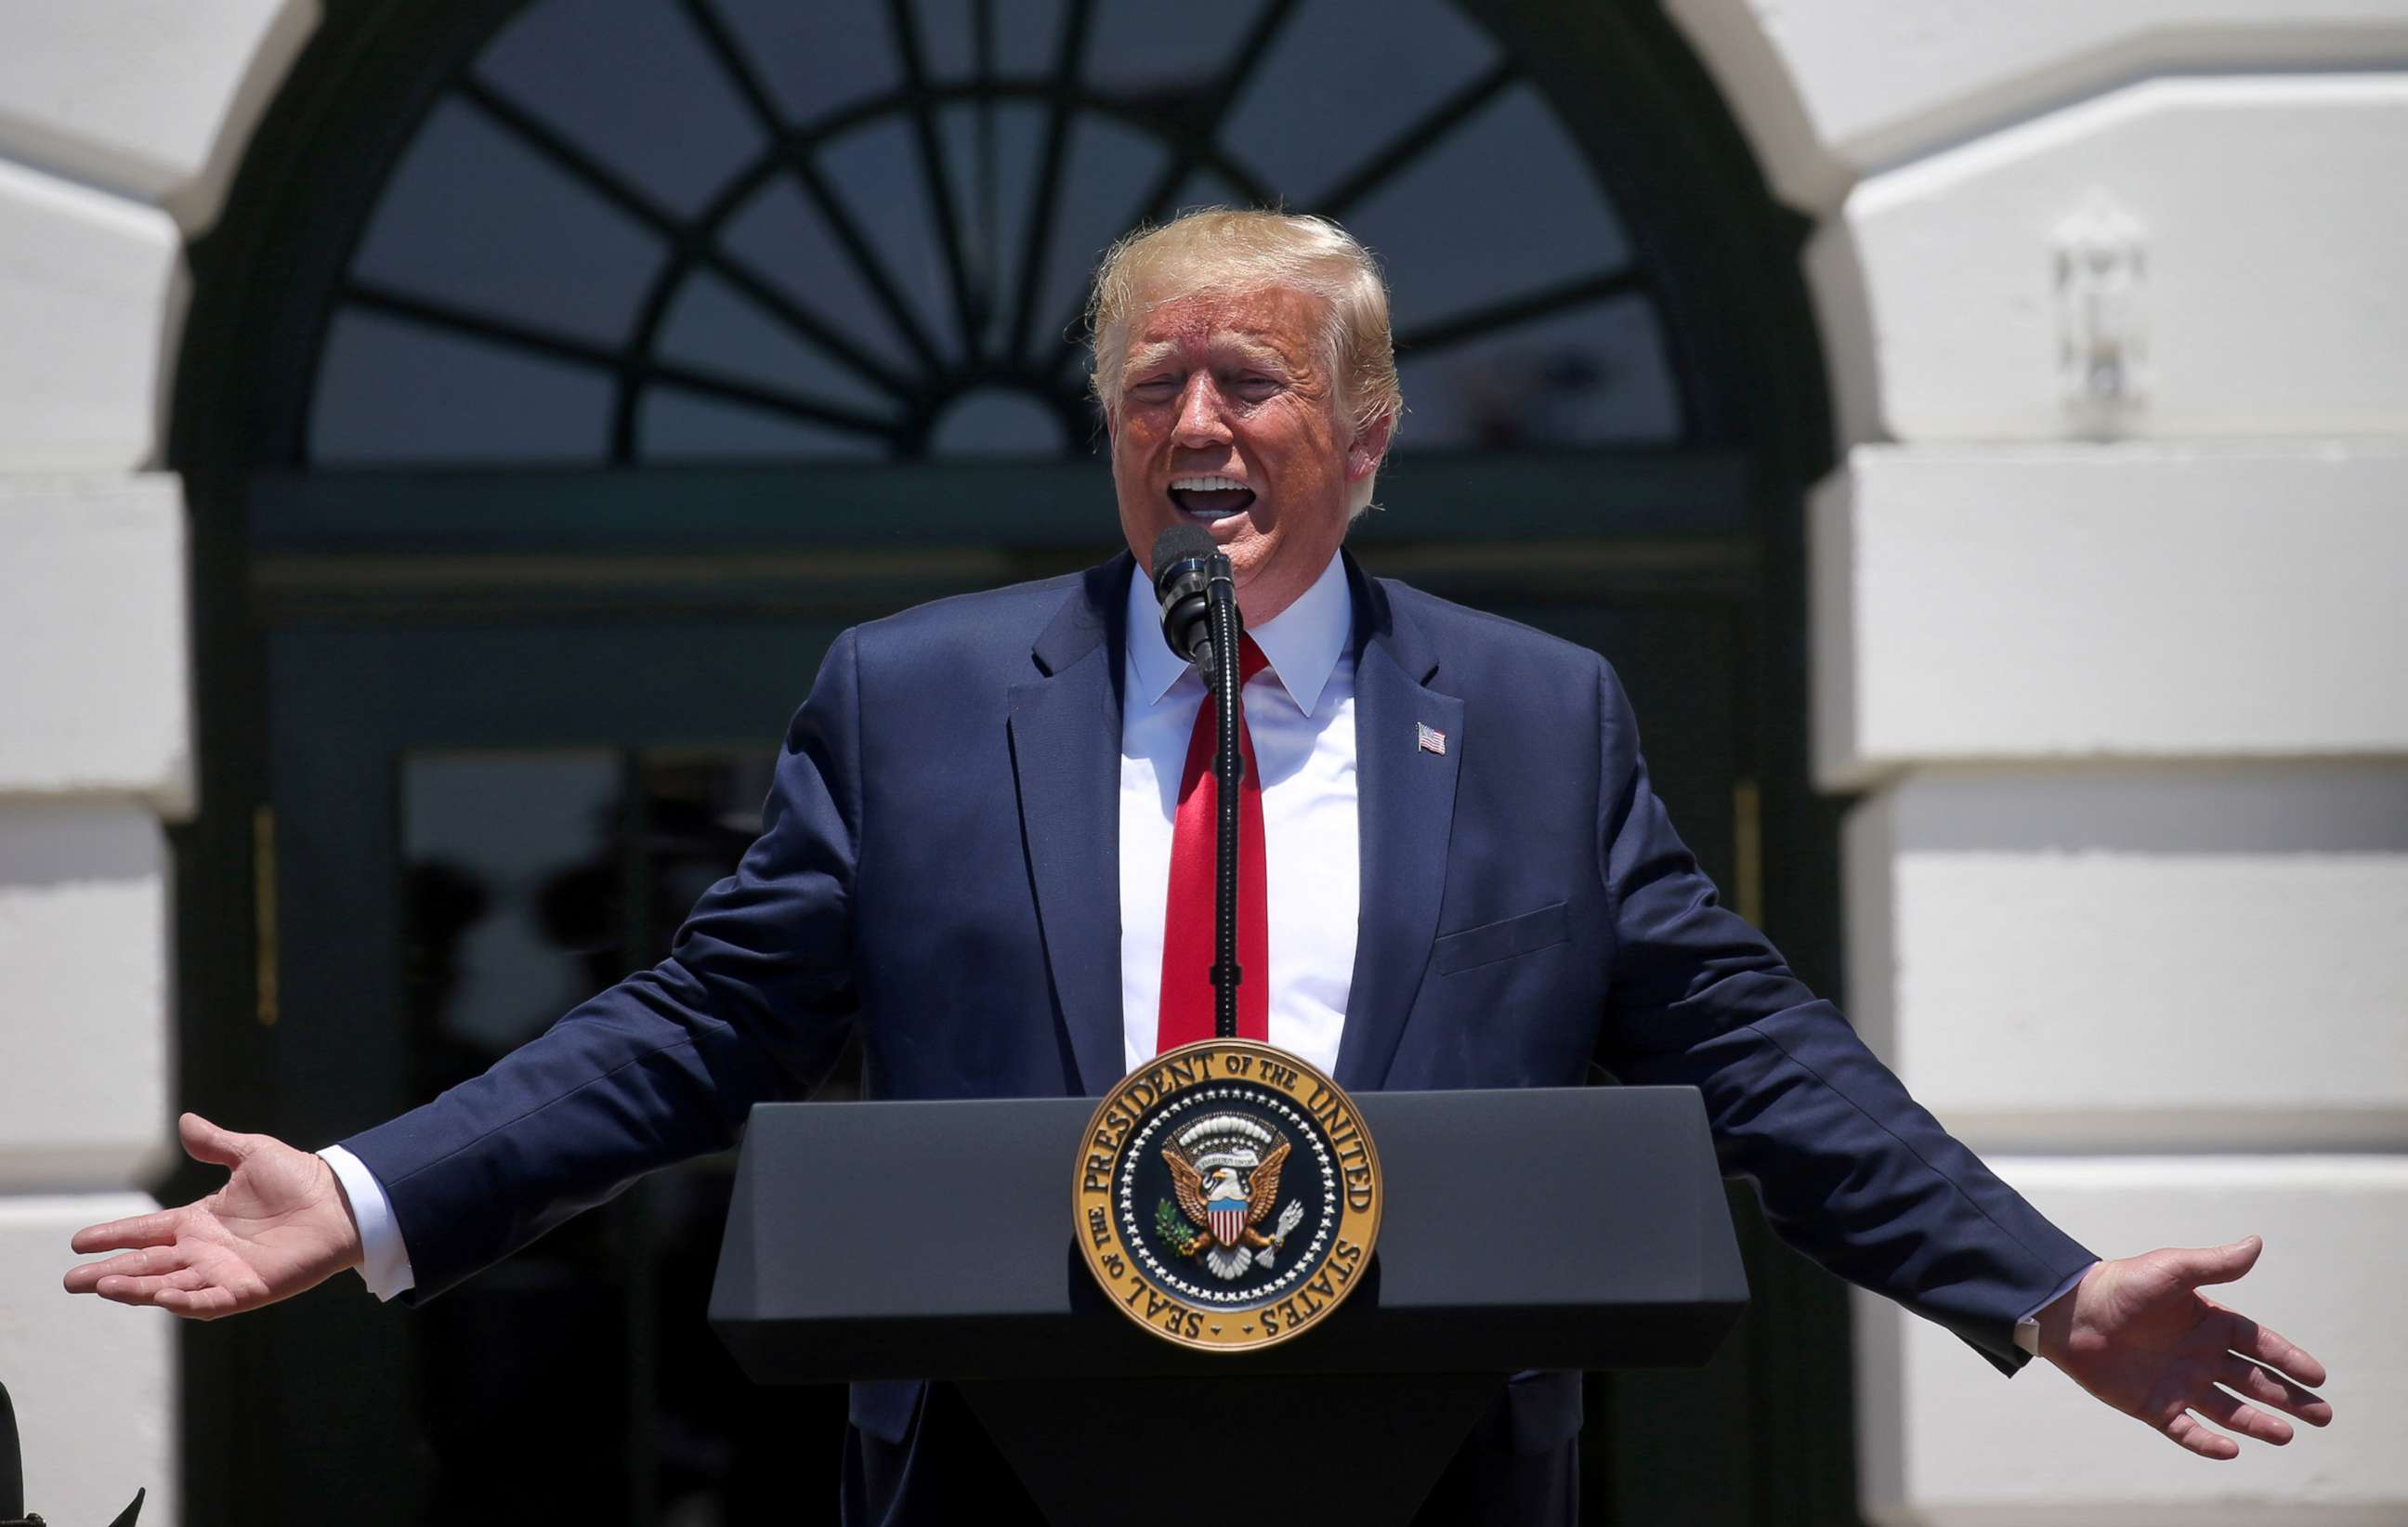 PHOTO: President Donald Trump answers questions from the media during an event on the South Lawn of the White House, July 15, 2019.